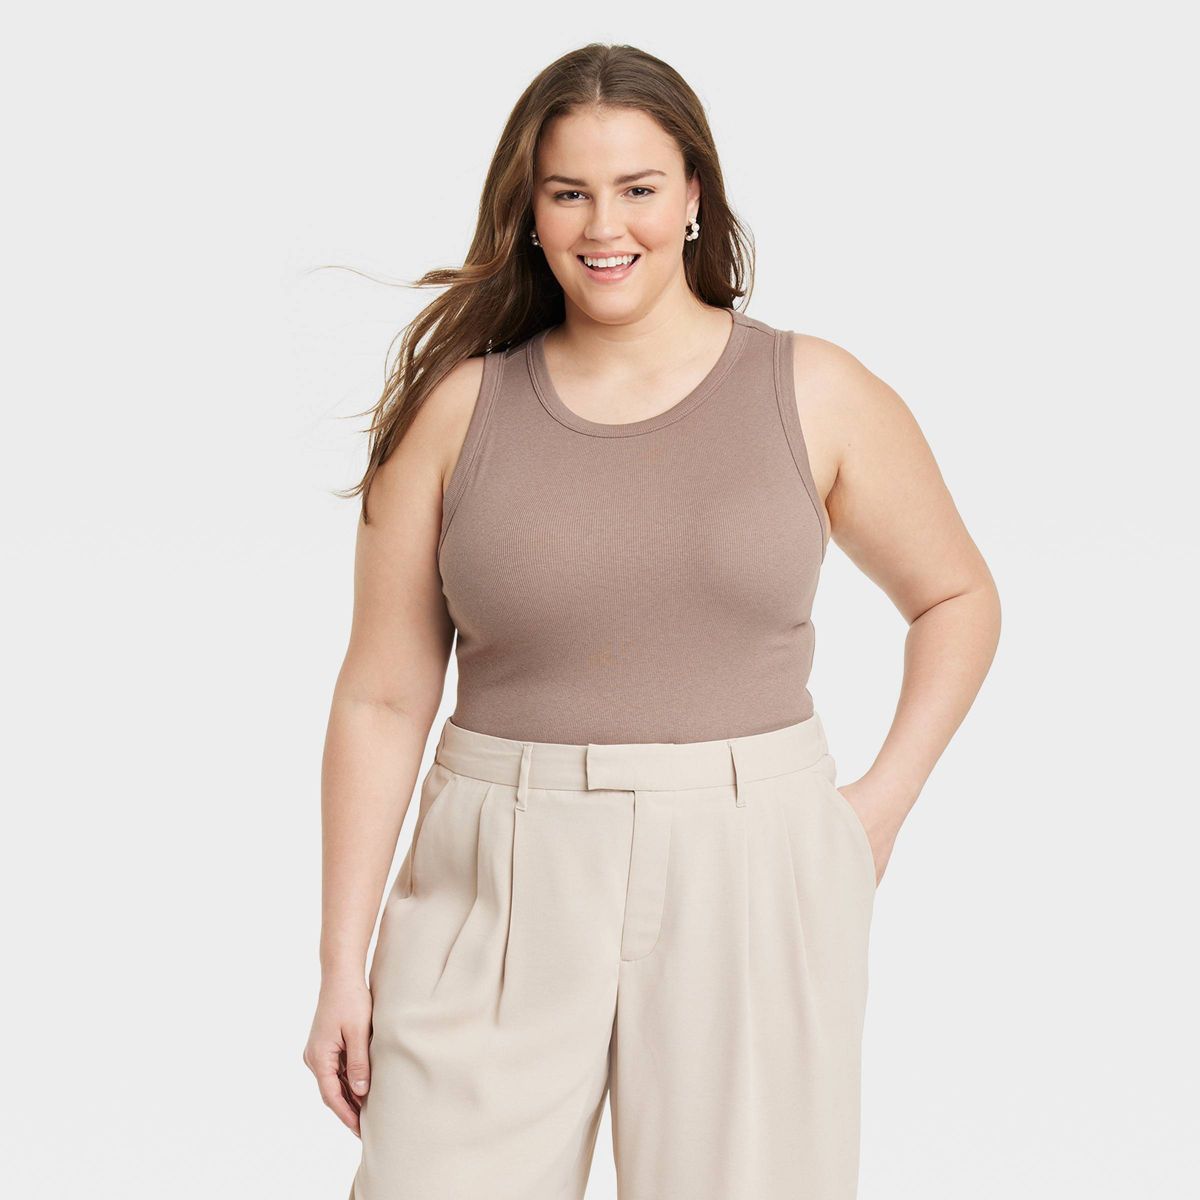 Women's Slim Fit Ribbed High Neck Tank Top - A New Day™ Tan S | Target